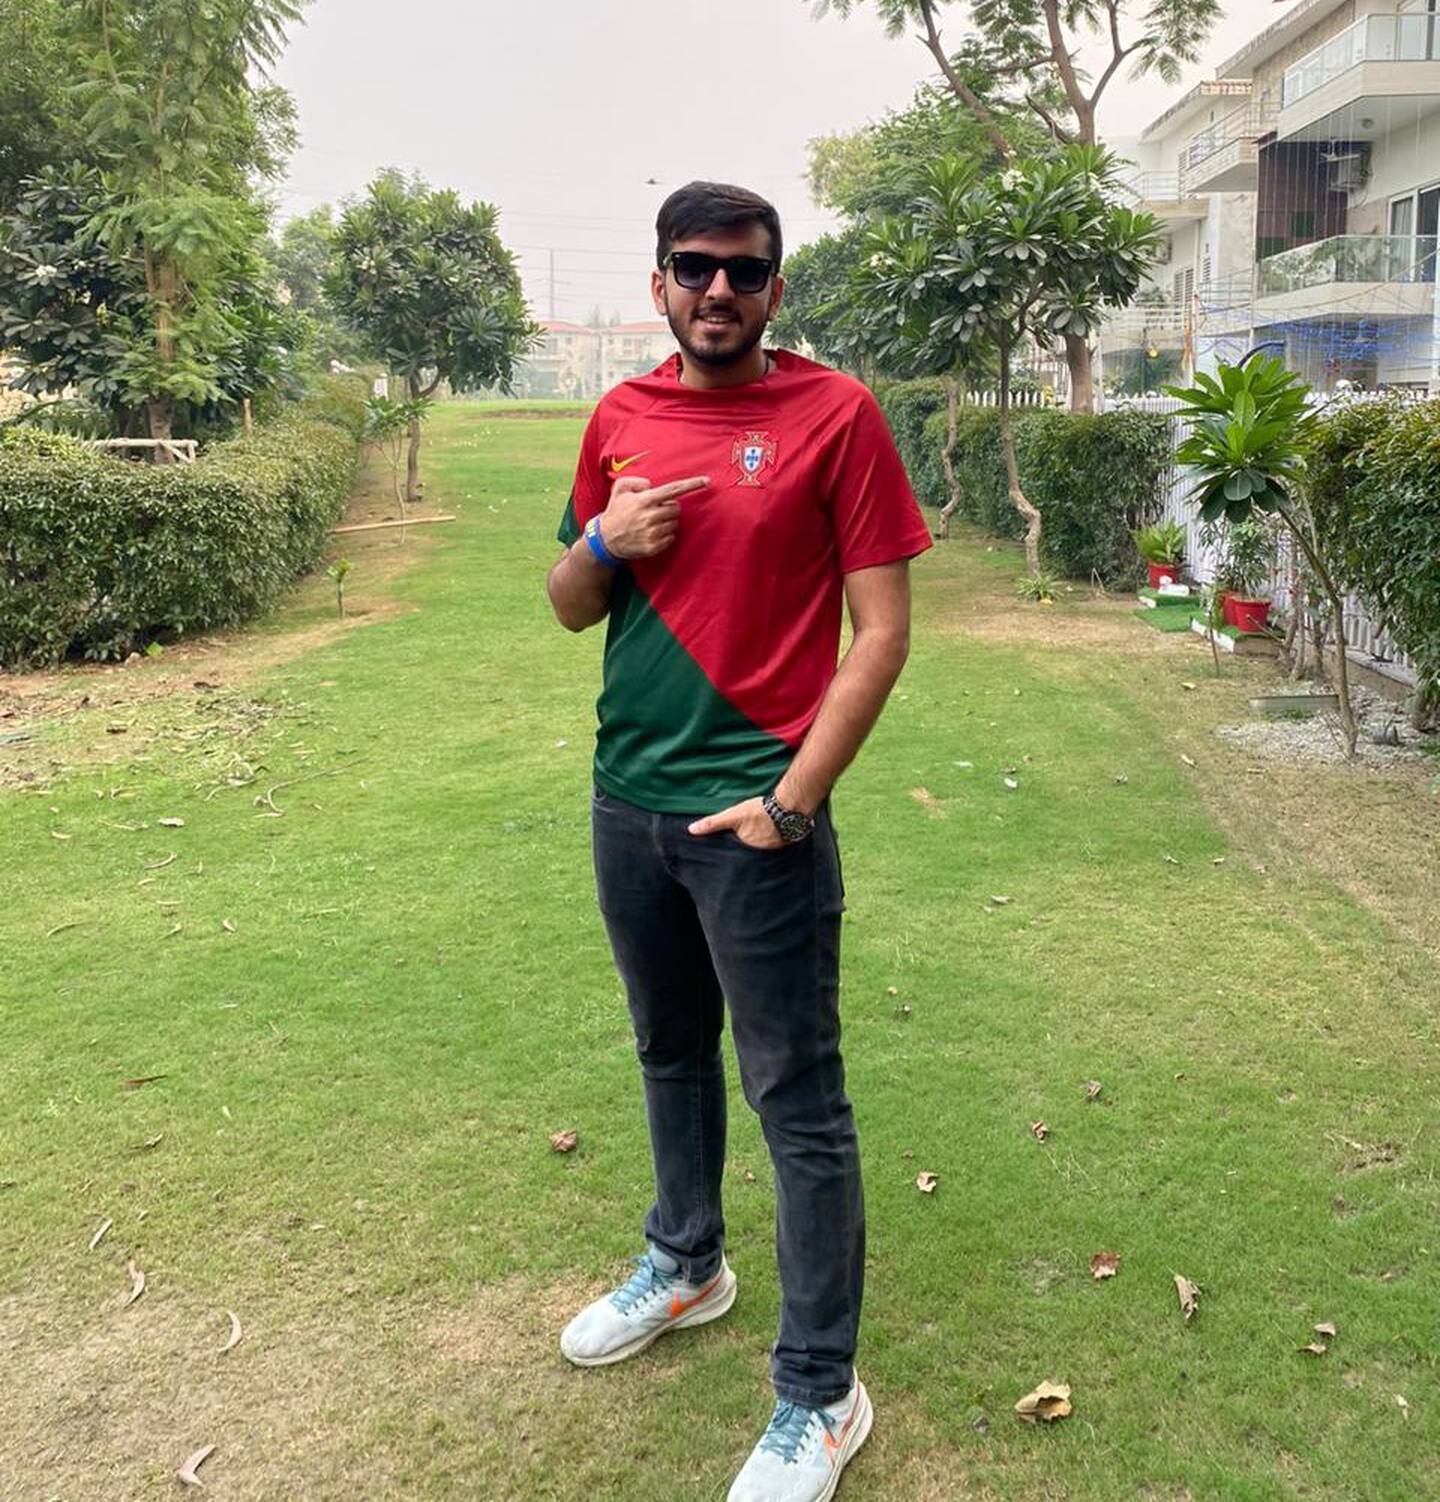 Software engineer Kunal Sharma from New Delhi has saved up for months to splash out on a trip to Doha to watch his hero Cristiano Ronaldo play. Image: Kunal Sharma